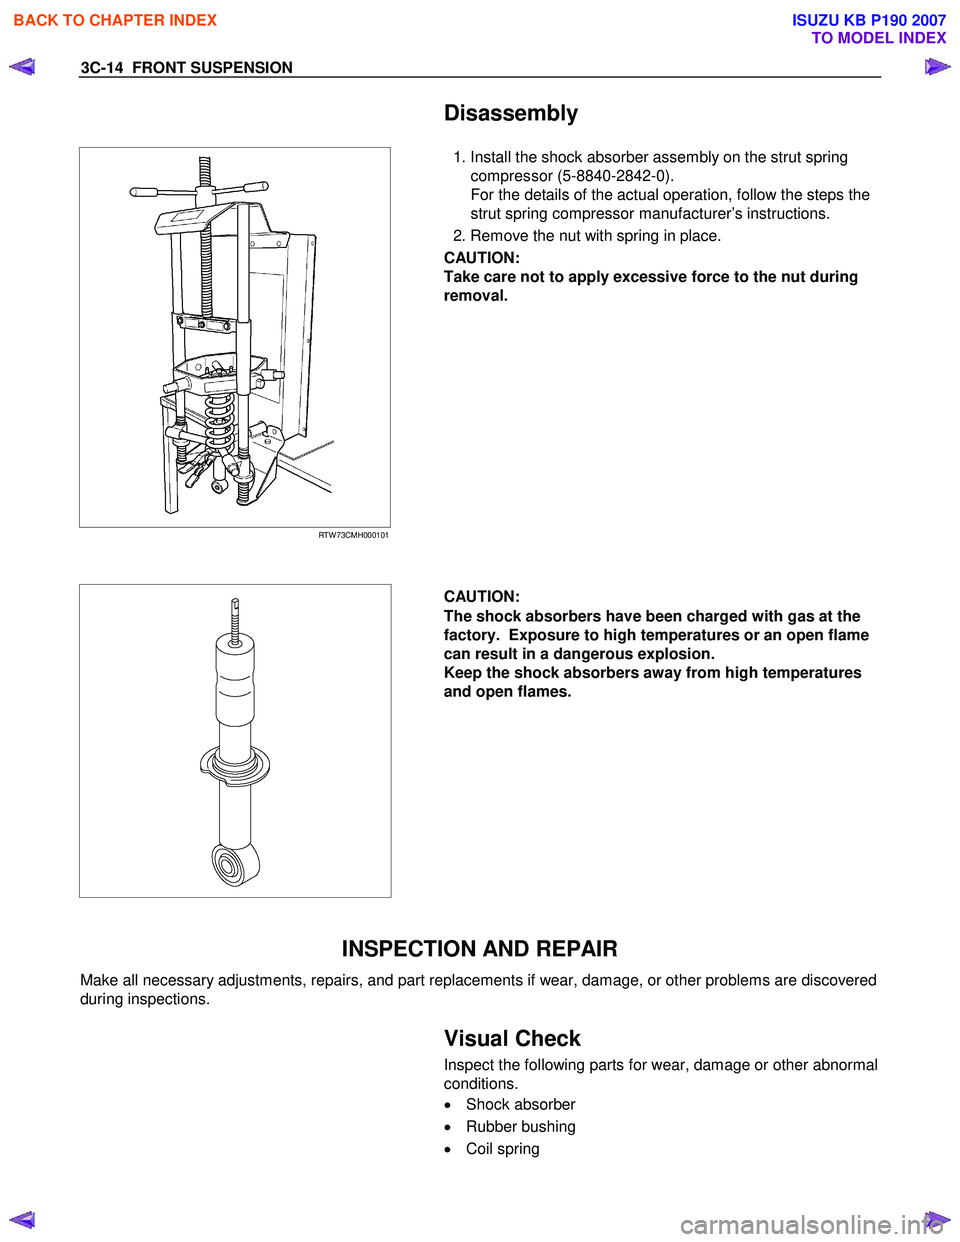 ISUZU KB P190 2007  Workshop Repair Manual 3C-14  FRONT SUSPENSION 
  Disassembly 
 
RTW 73CMH000101  
  
  
    1. Install the shock absorber assembly on the strut spring 
compressor (5-8840-2842-0). 
For the details of the actual operation, 